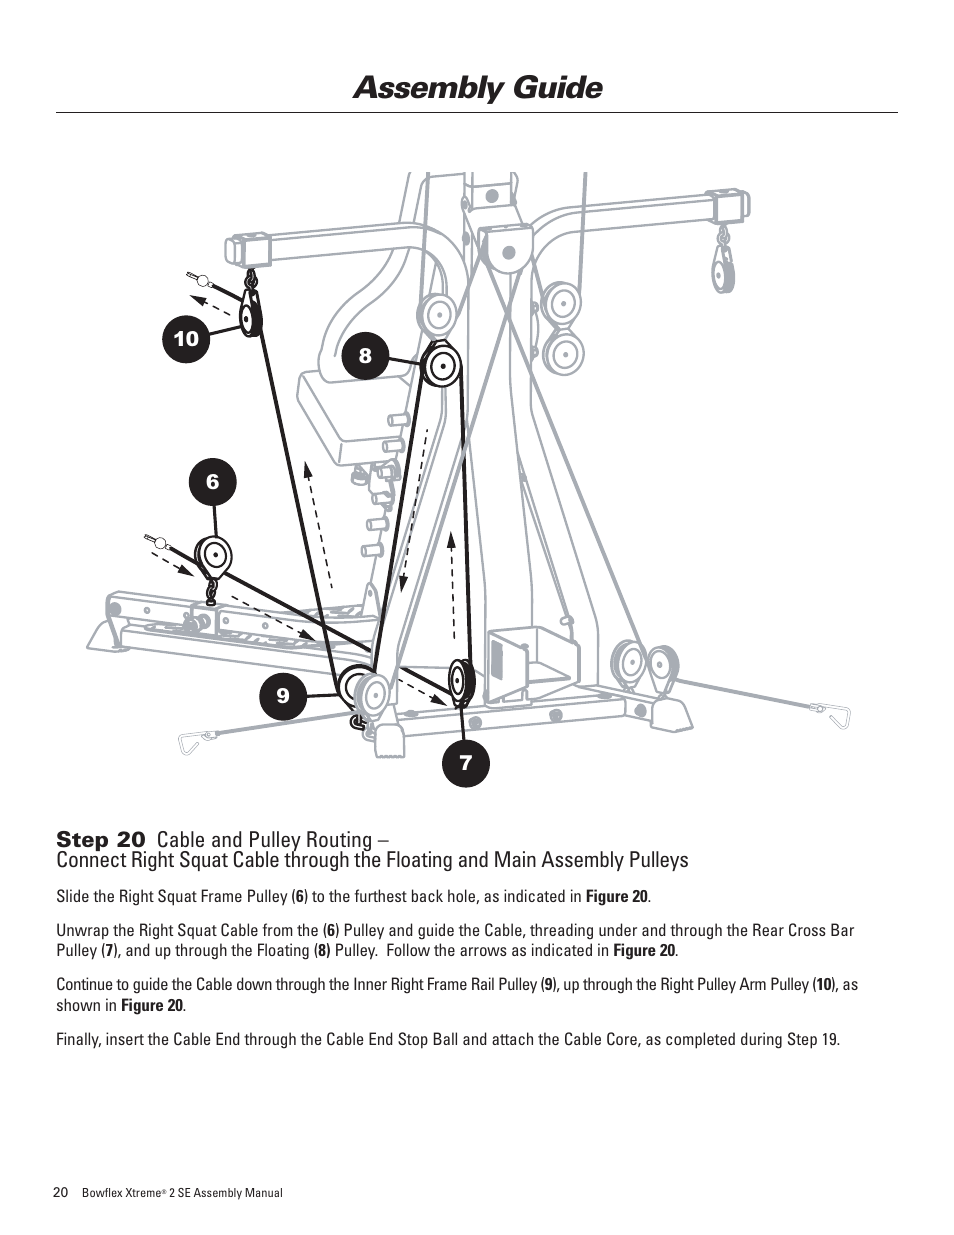 Assembly guide | Bowflex Xtreme 2 SE User Manual | Page 24 / 28